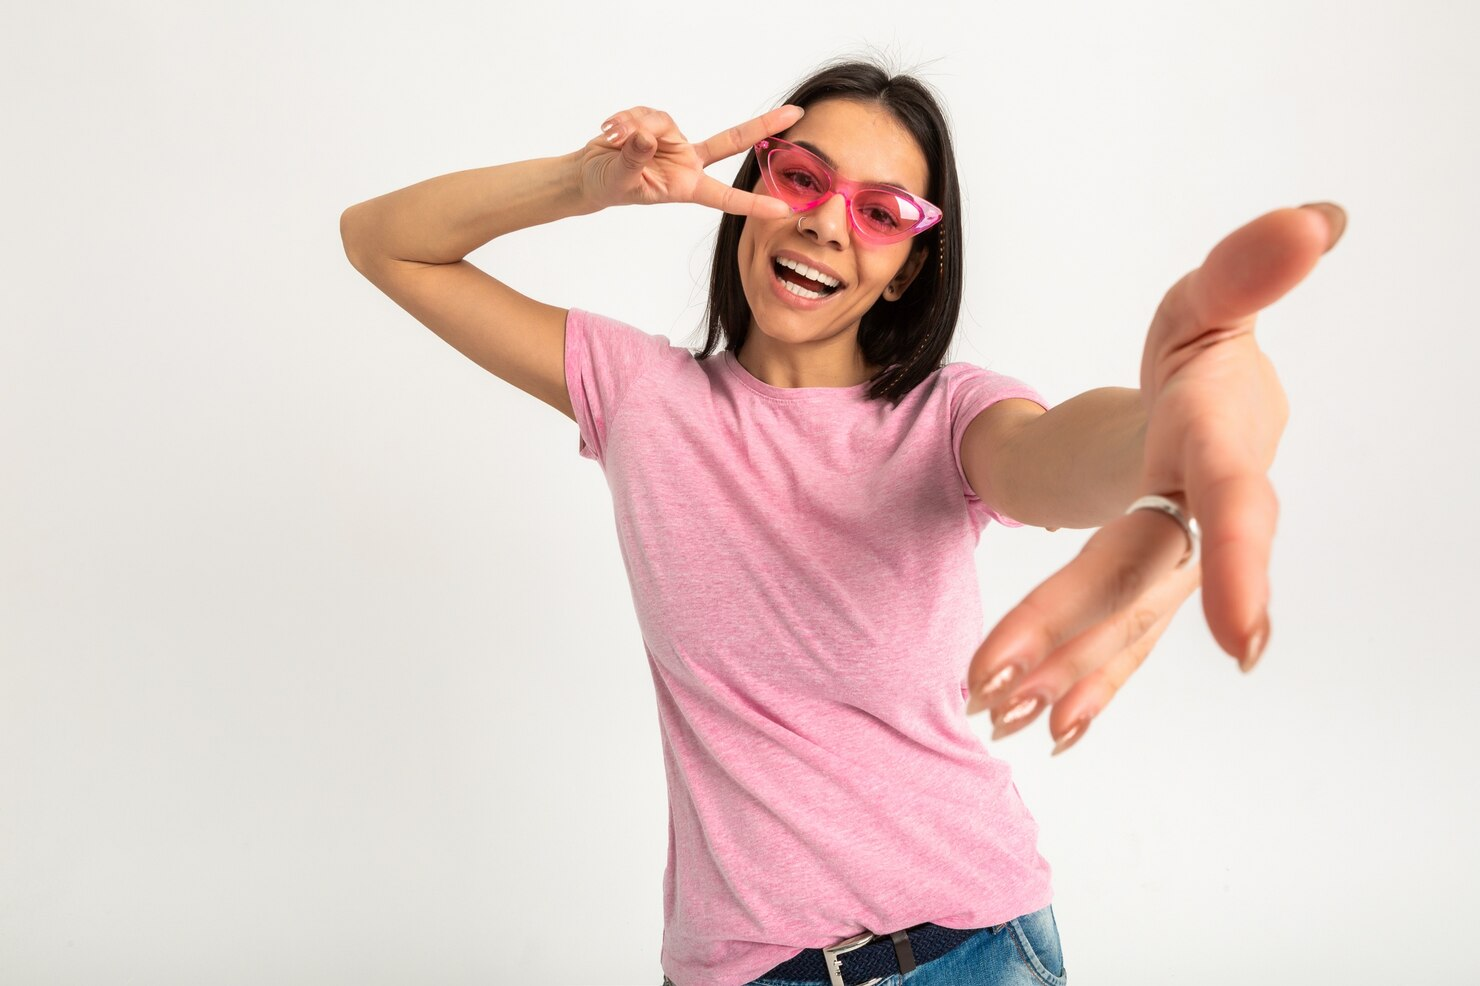 A girl in a pink t-shirt and sunglasses makes a victory sign.
